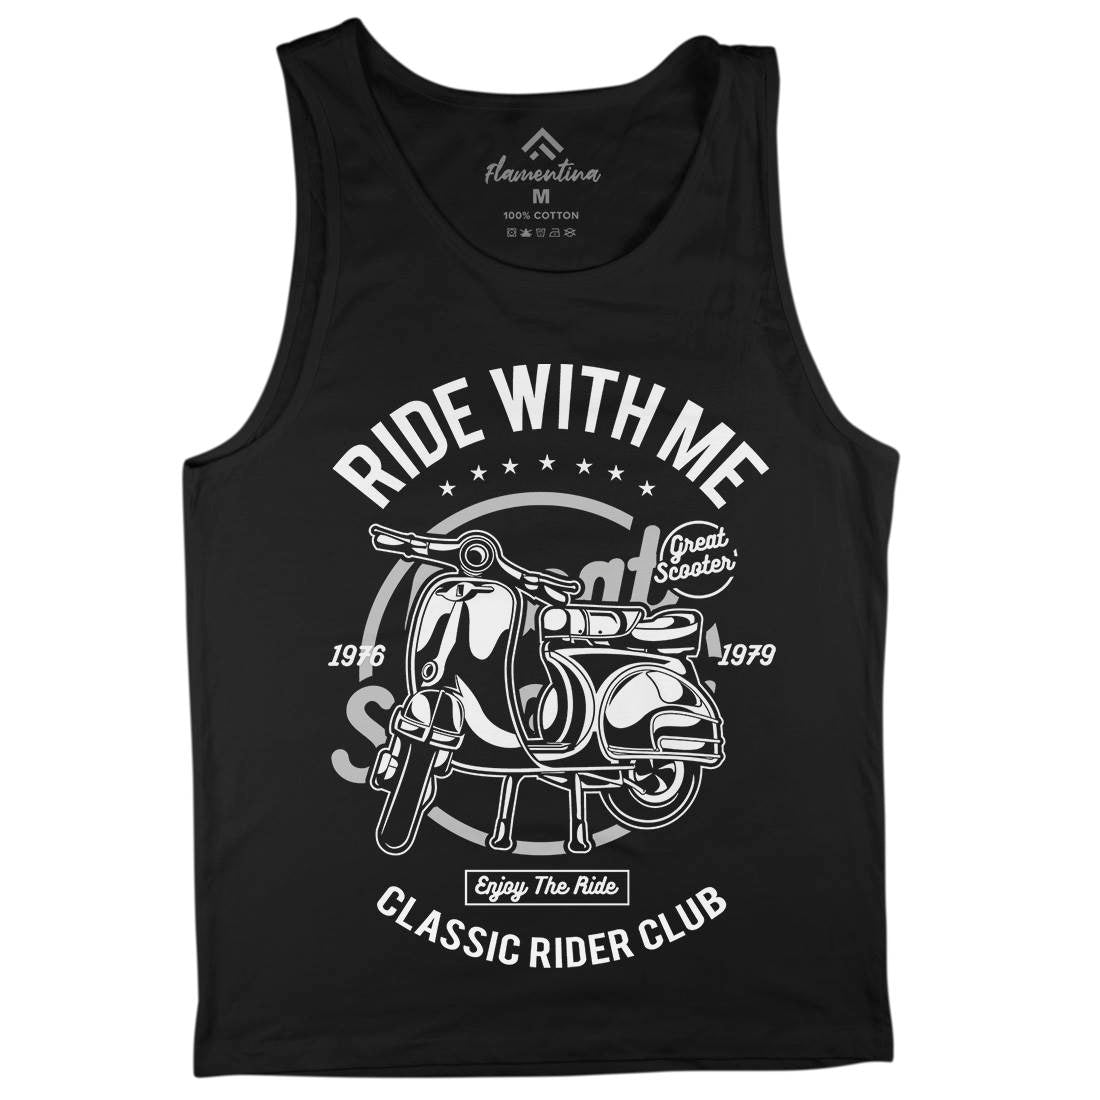 Ride With Me Mens Tank Top Vest Motorcycles A120